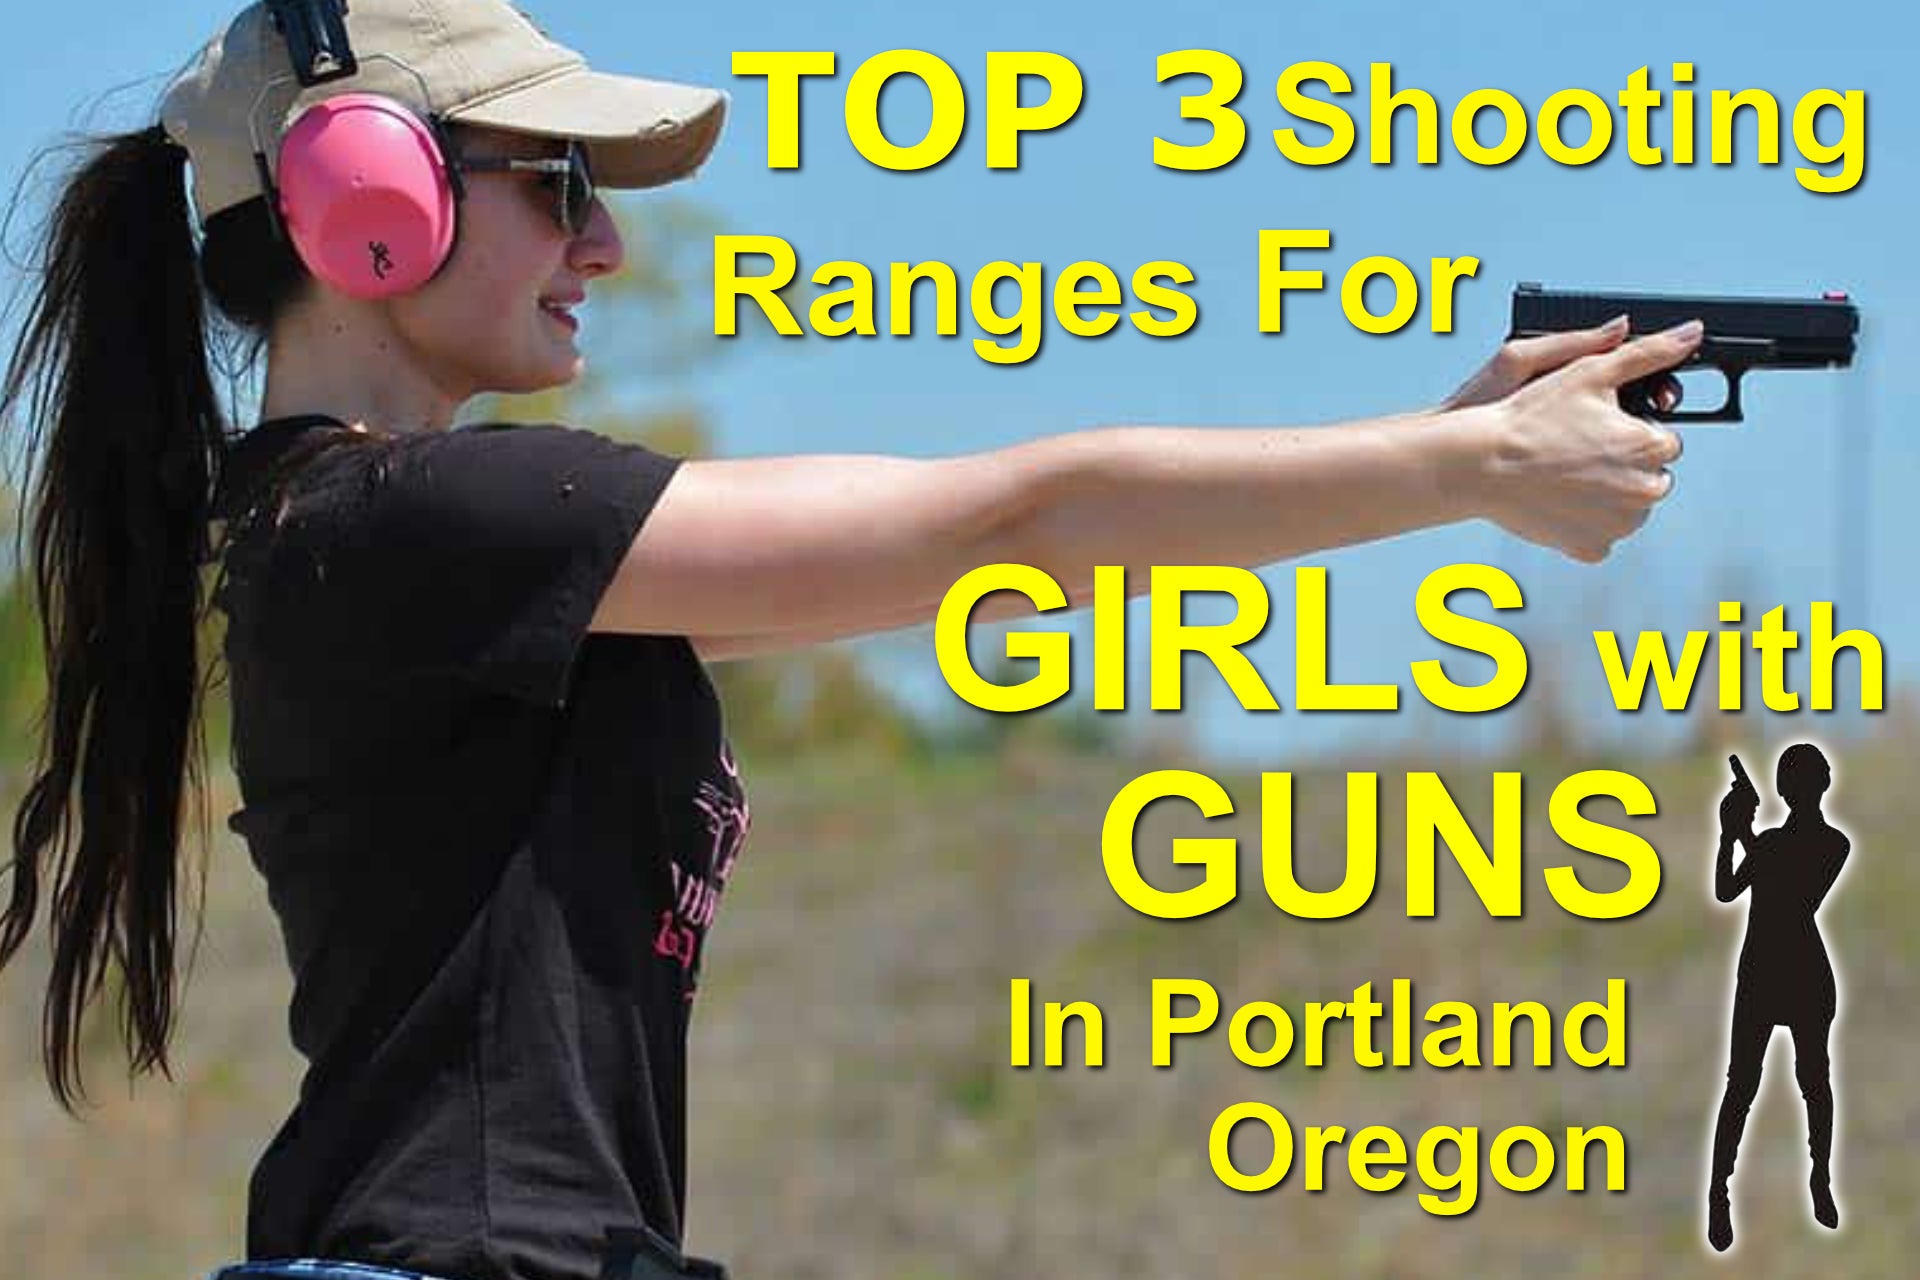 Top 3 Shooting Ranges For Girls With Guns In Portland Oregon